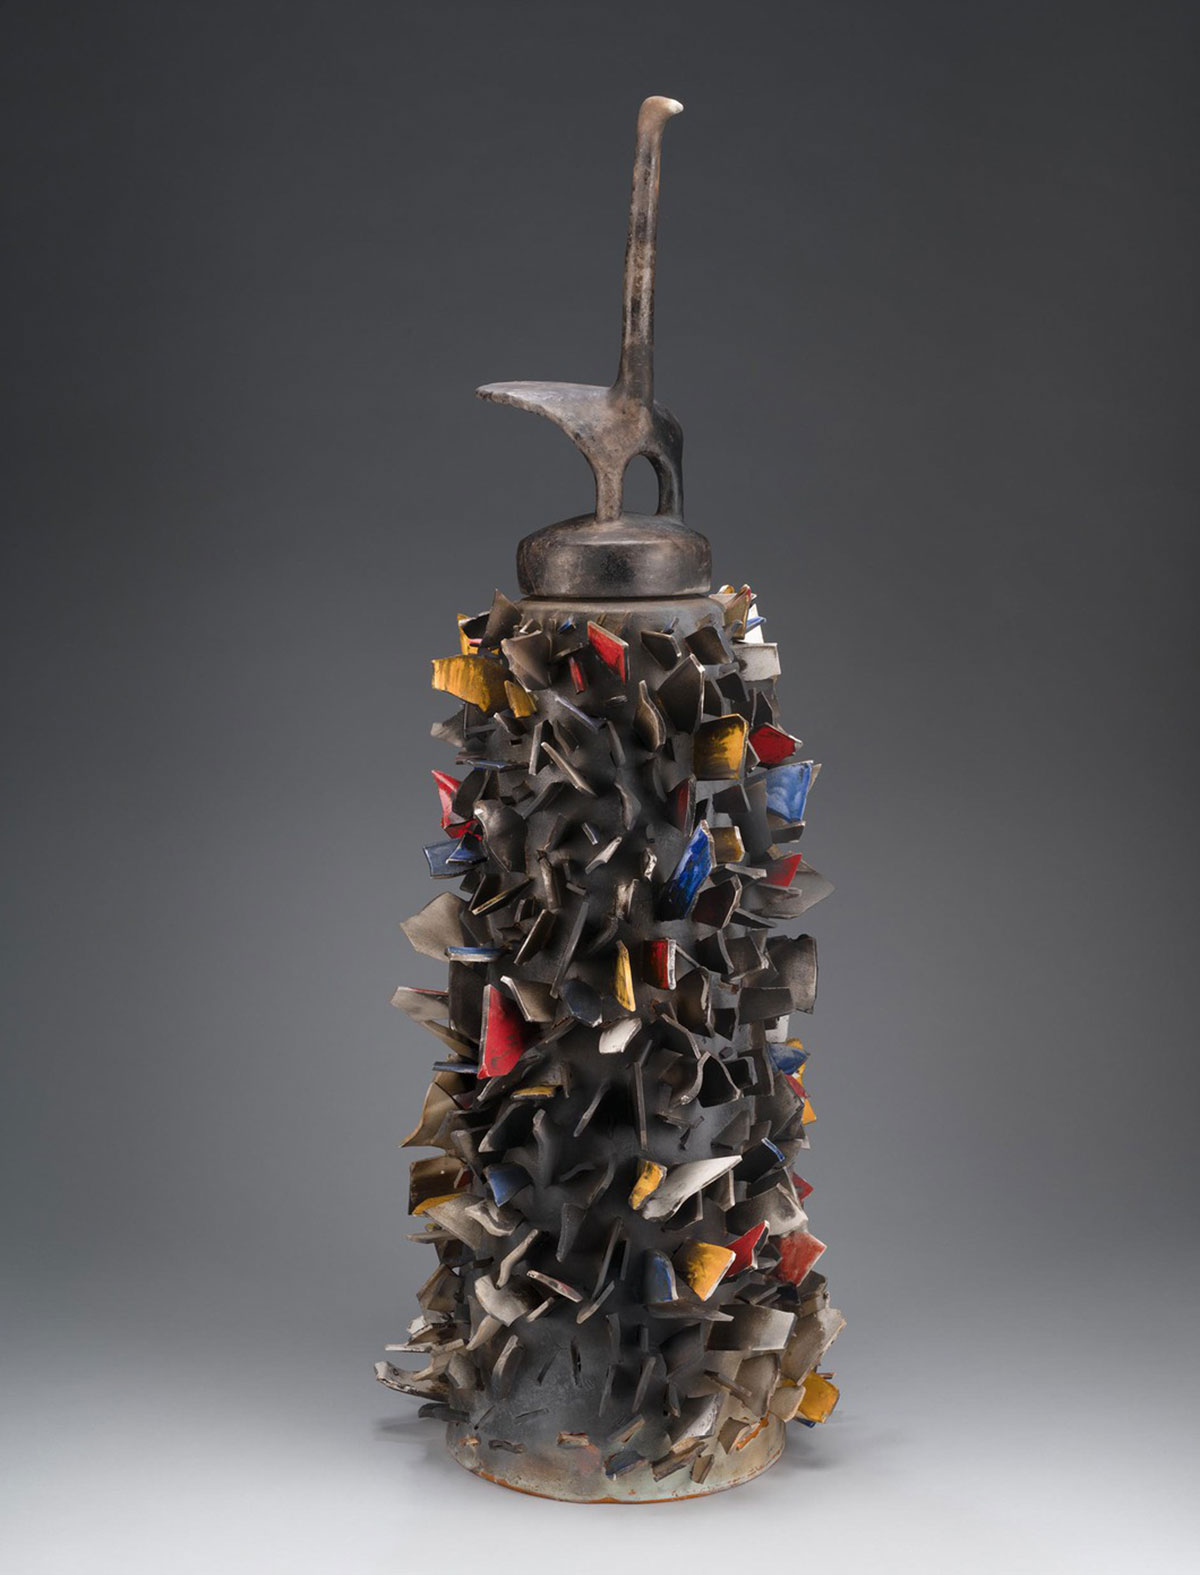 A tall sculpture with a narrow, cylindrical base covered in colored shards of porcelain; a tall earthenware figure sits atop the base